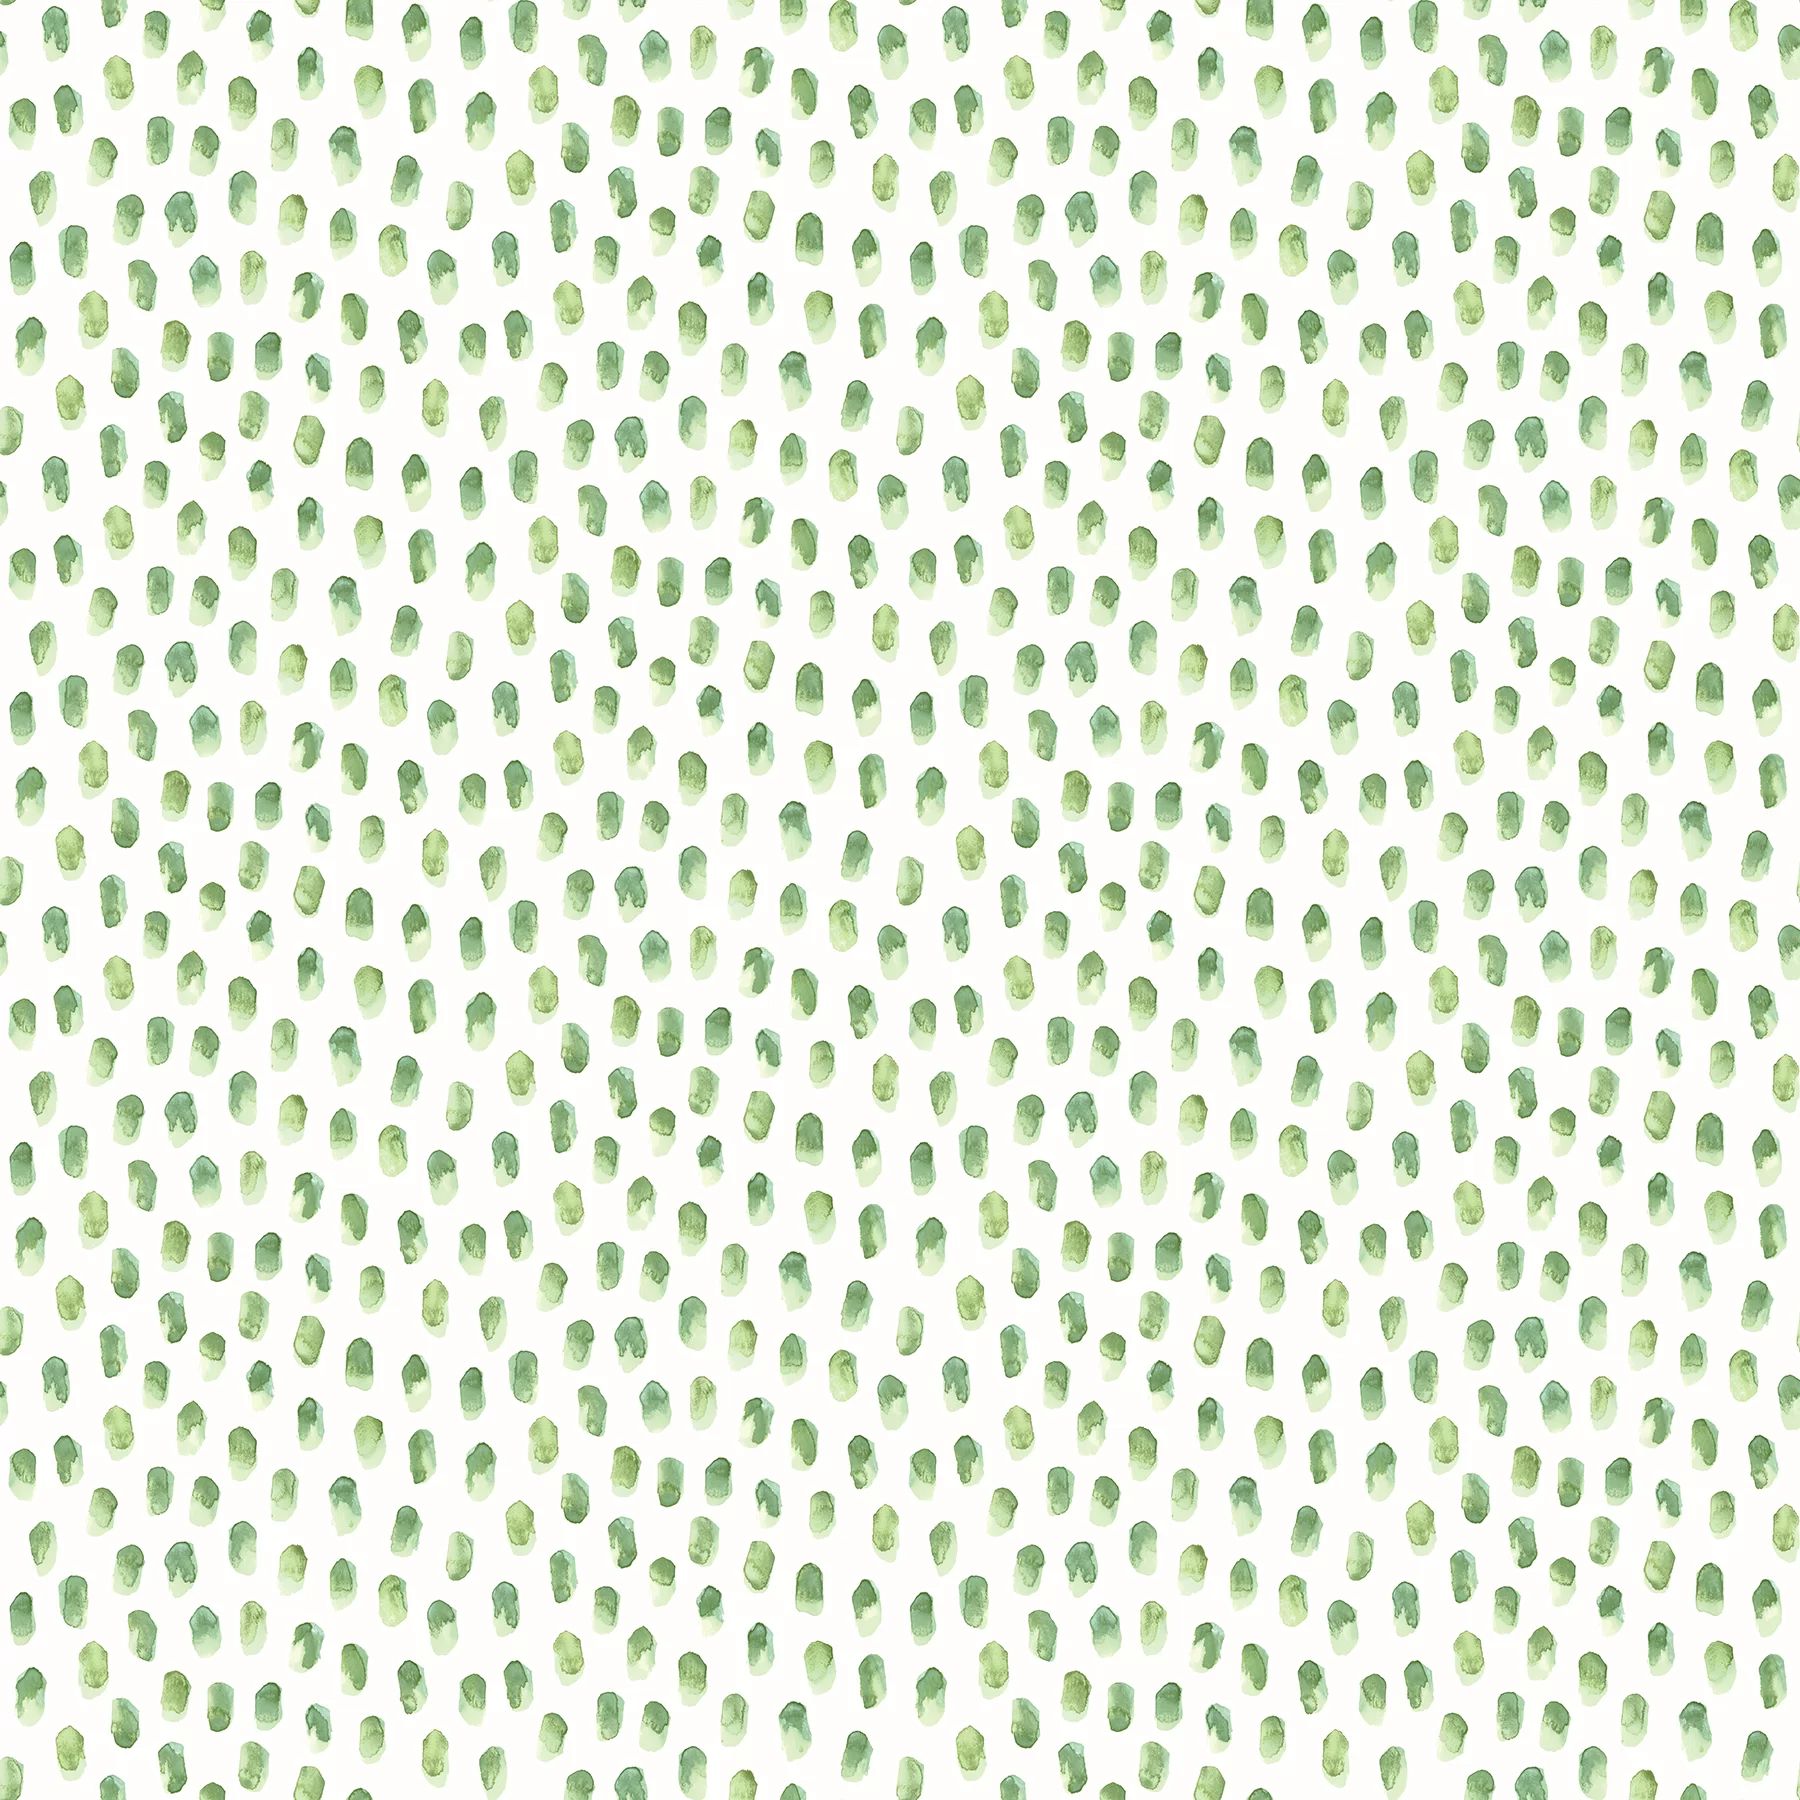 Madeline Painted Dots Wallpaper Roll | Wayfair North America